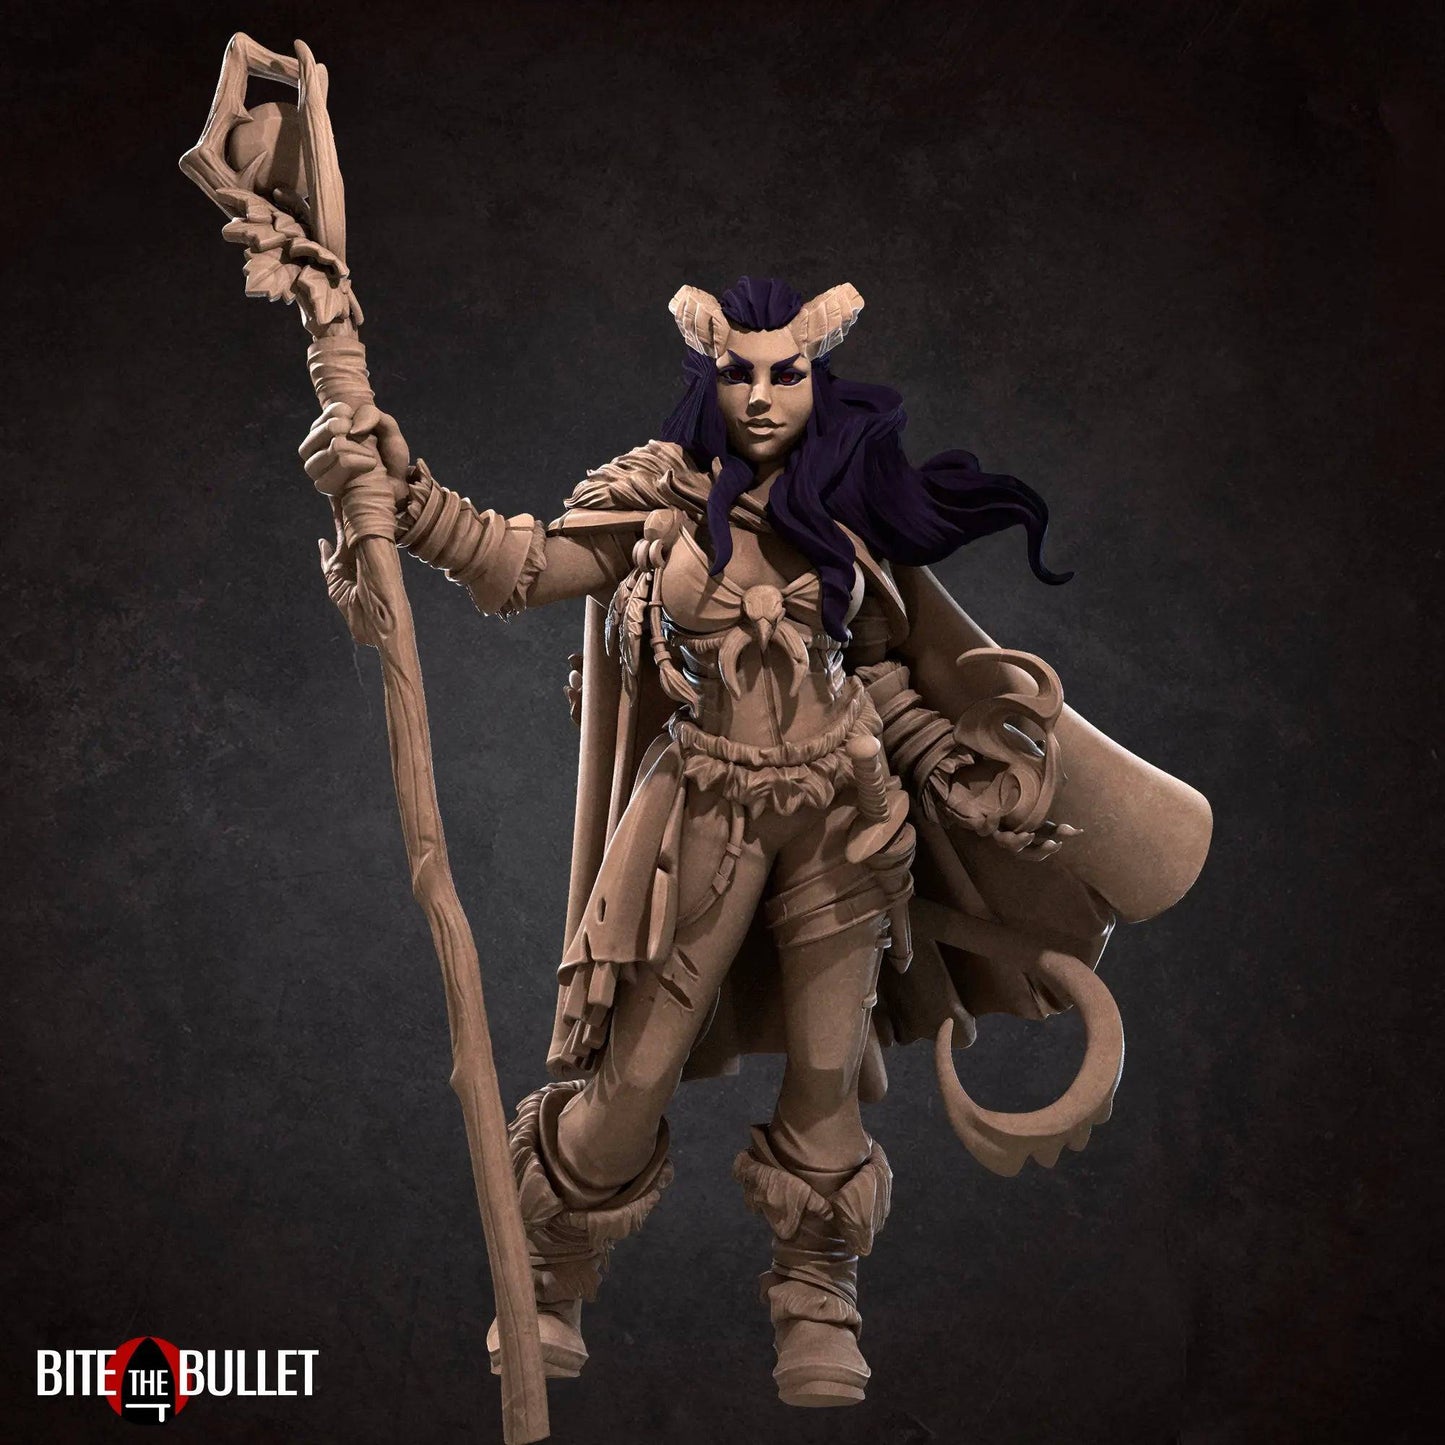 Tiefling Druid with Spear or Staff | D&D Miniature TTRPG Character | Bite the Bullet - Tattles Told 3D